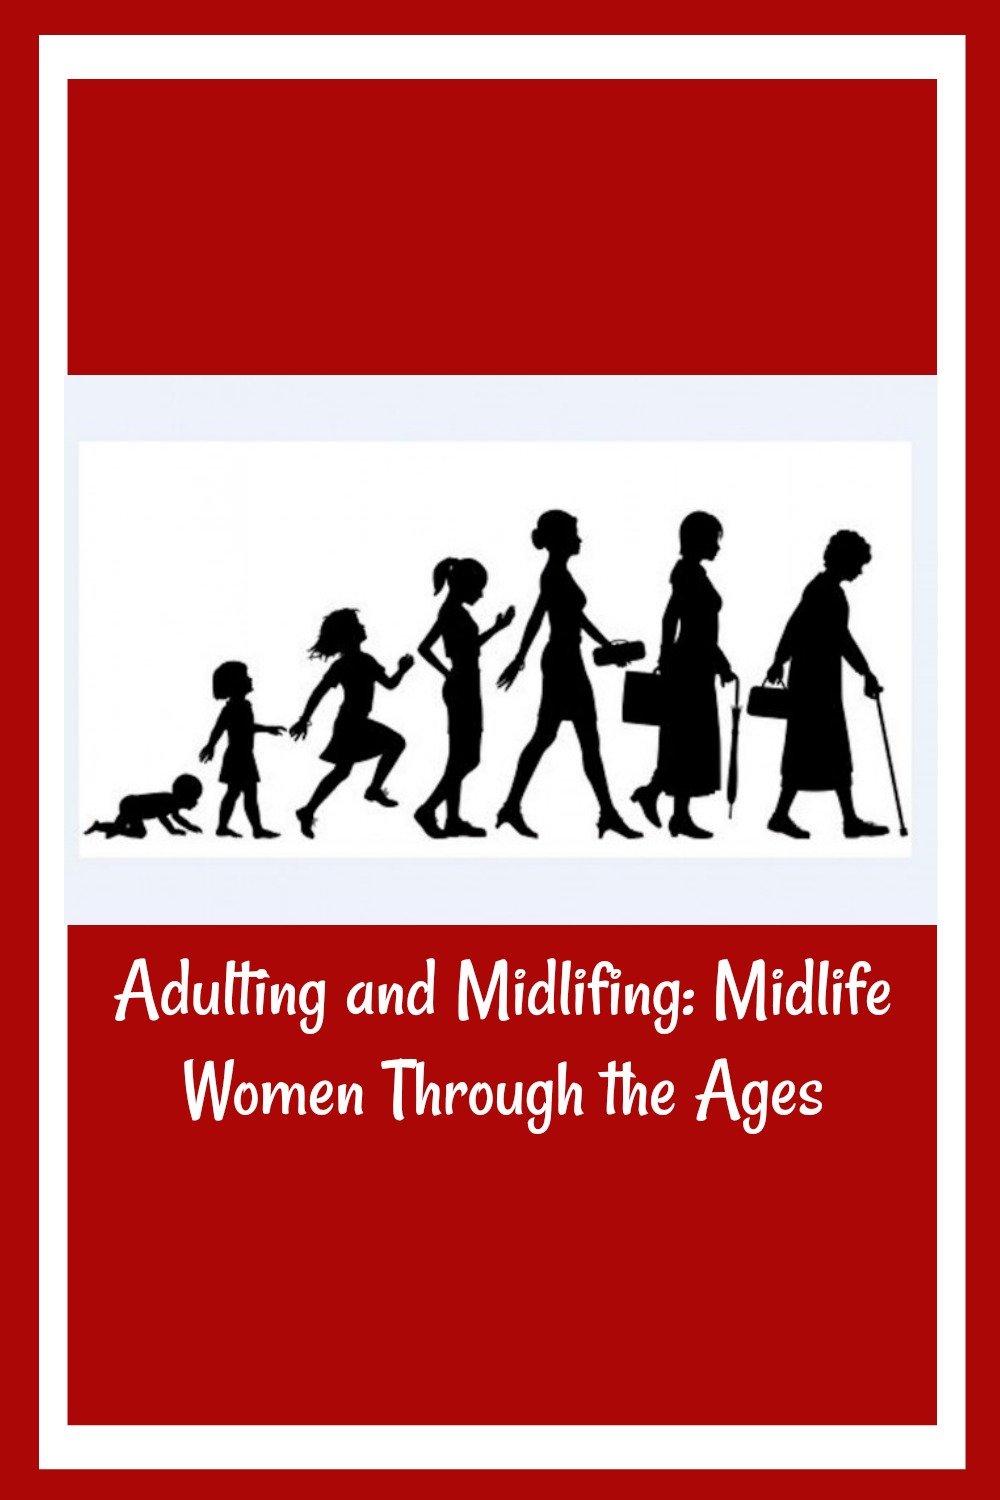 Adulting and Midlifing: Midlife Women Through the Ages